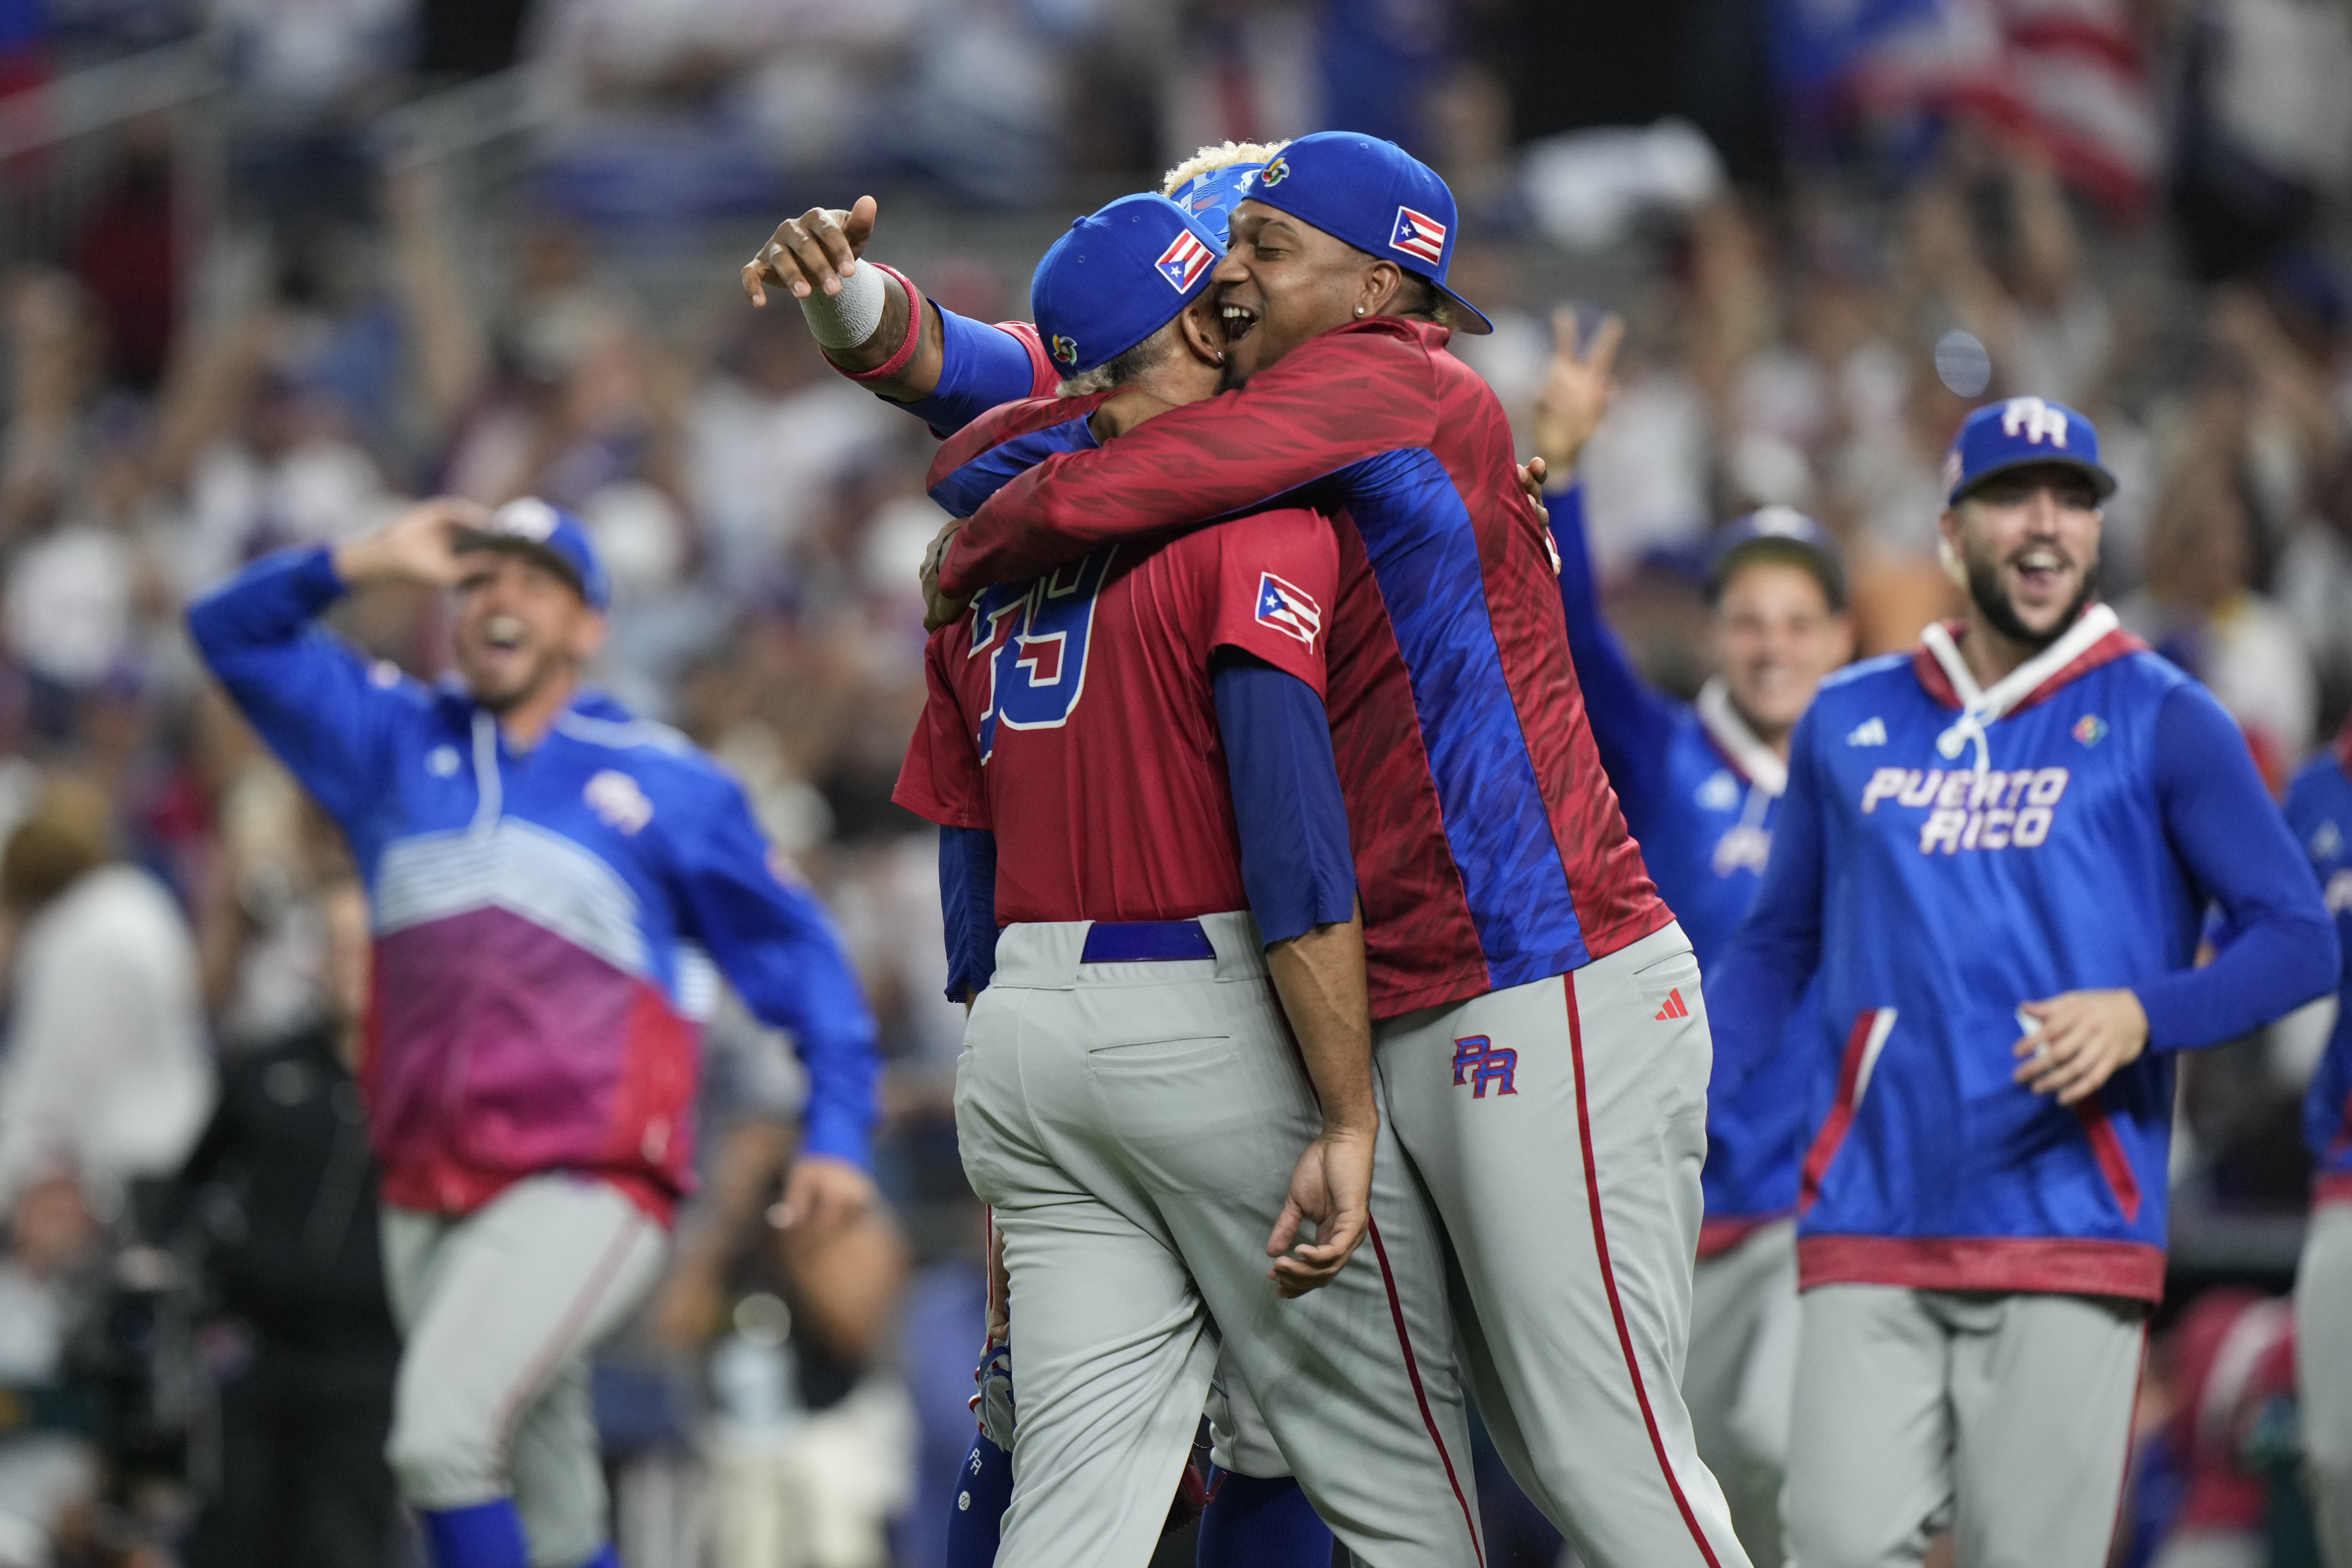 Brothers Edwin, Alexis Diaz makes history with Tuesday saves